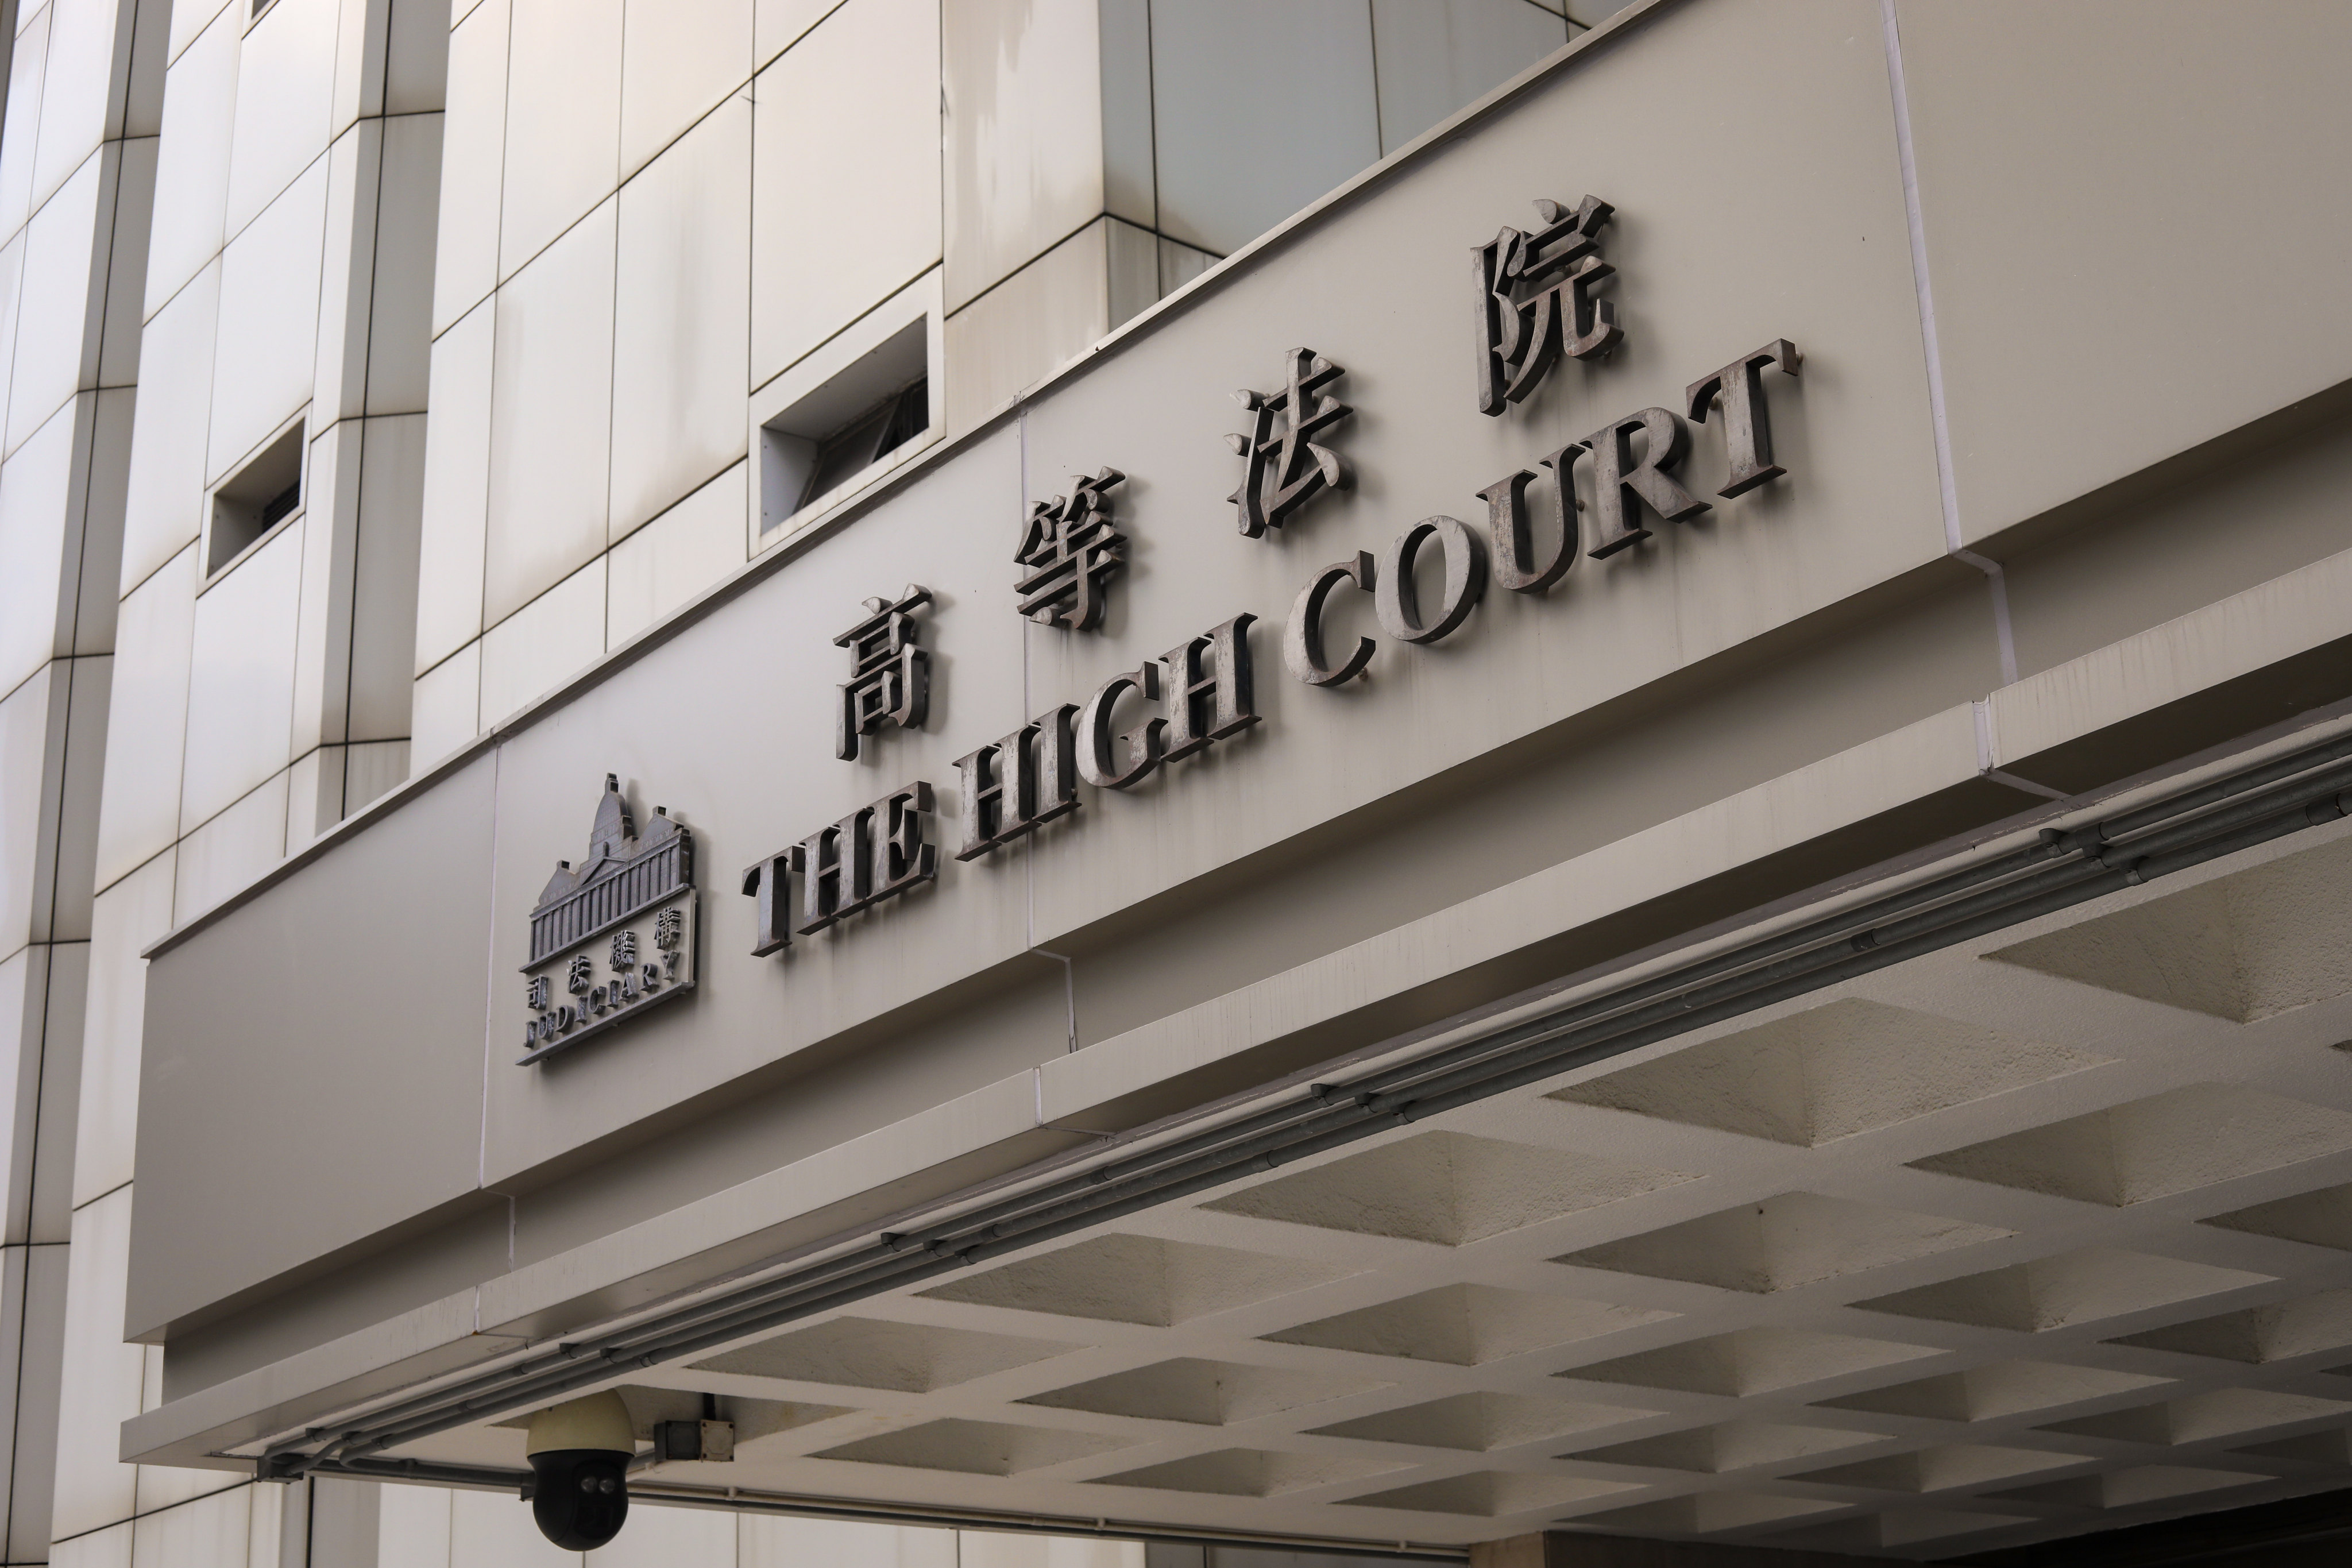 The High Court in Admiralty. The Court of Appeal has quashed charges of arson and possession of illegal articles against a waitress. Photo: Sun Yeung